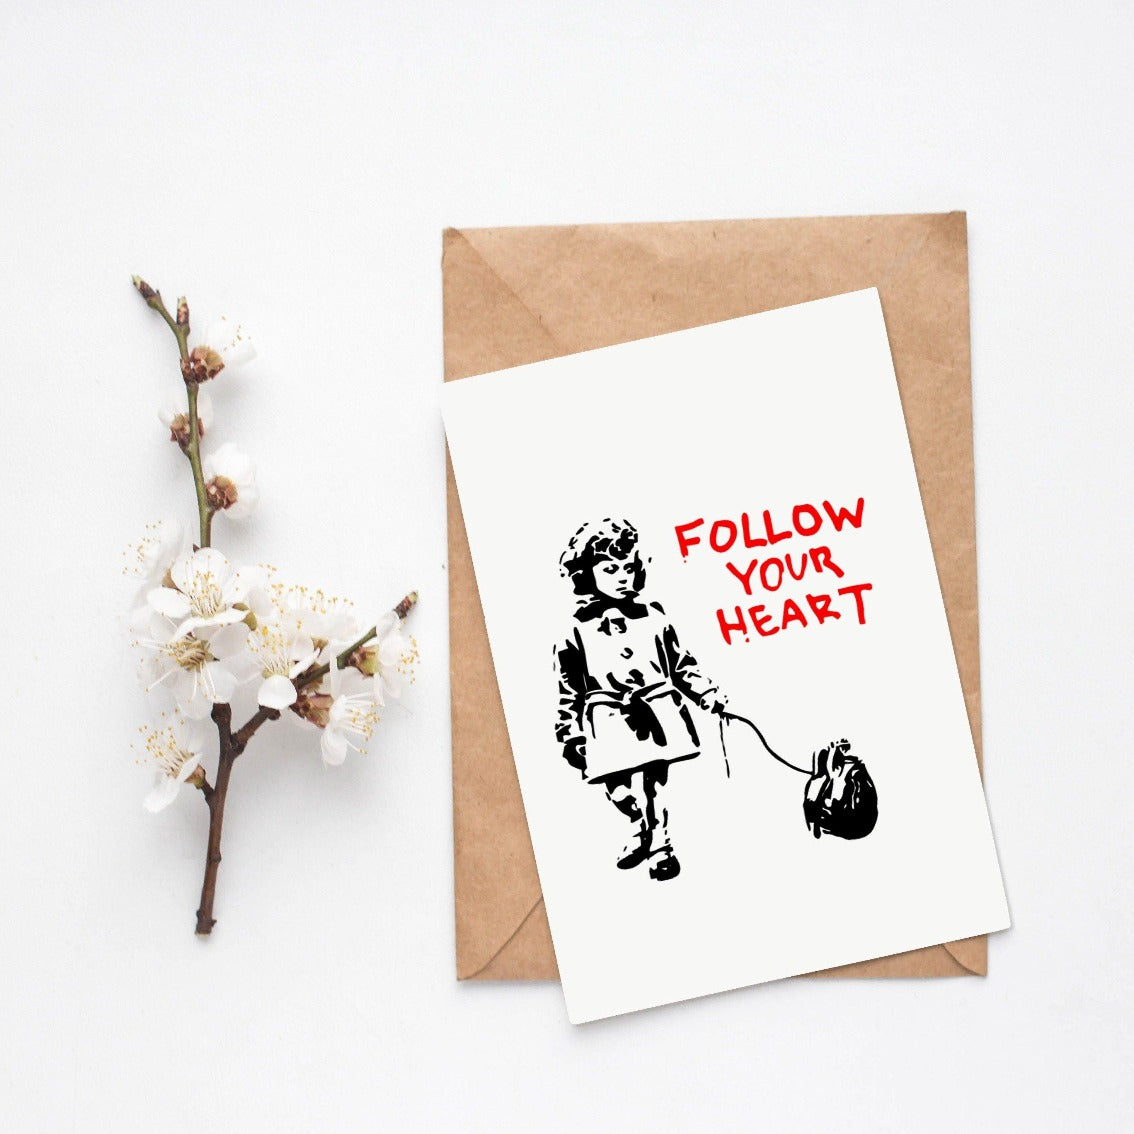 A beloved street artist brings his iconic style to your walls. Banksy is a street artist whose work has captured the hearts of people all over the world. He is known for his dark humor and political statements. Bring Banksy's art into your home with this beautiful print. Let the message "follow your heart" inspire you every day.